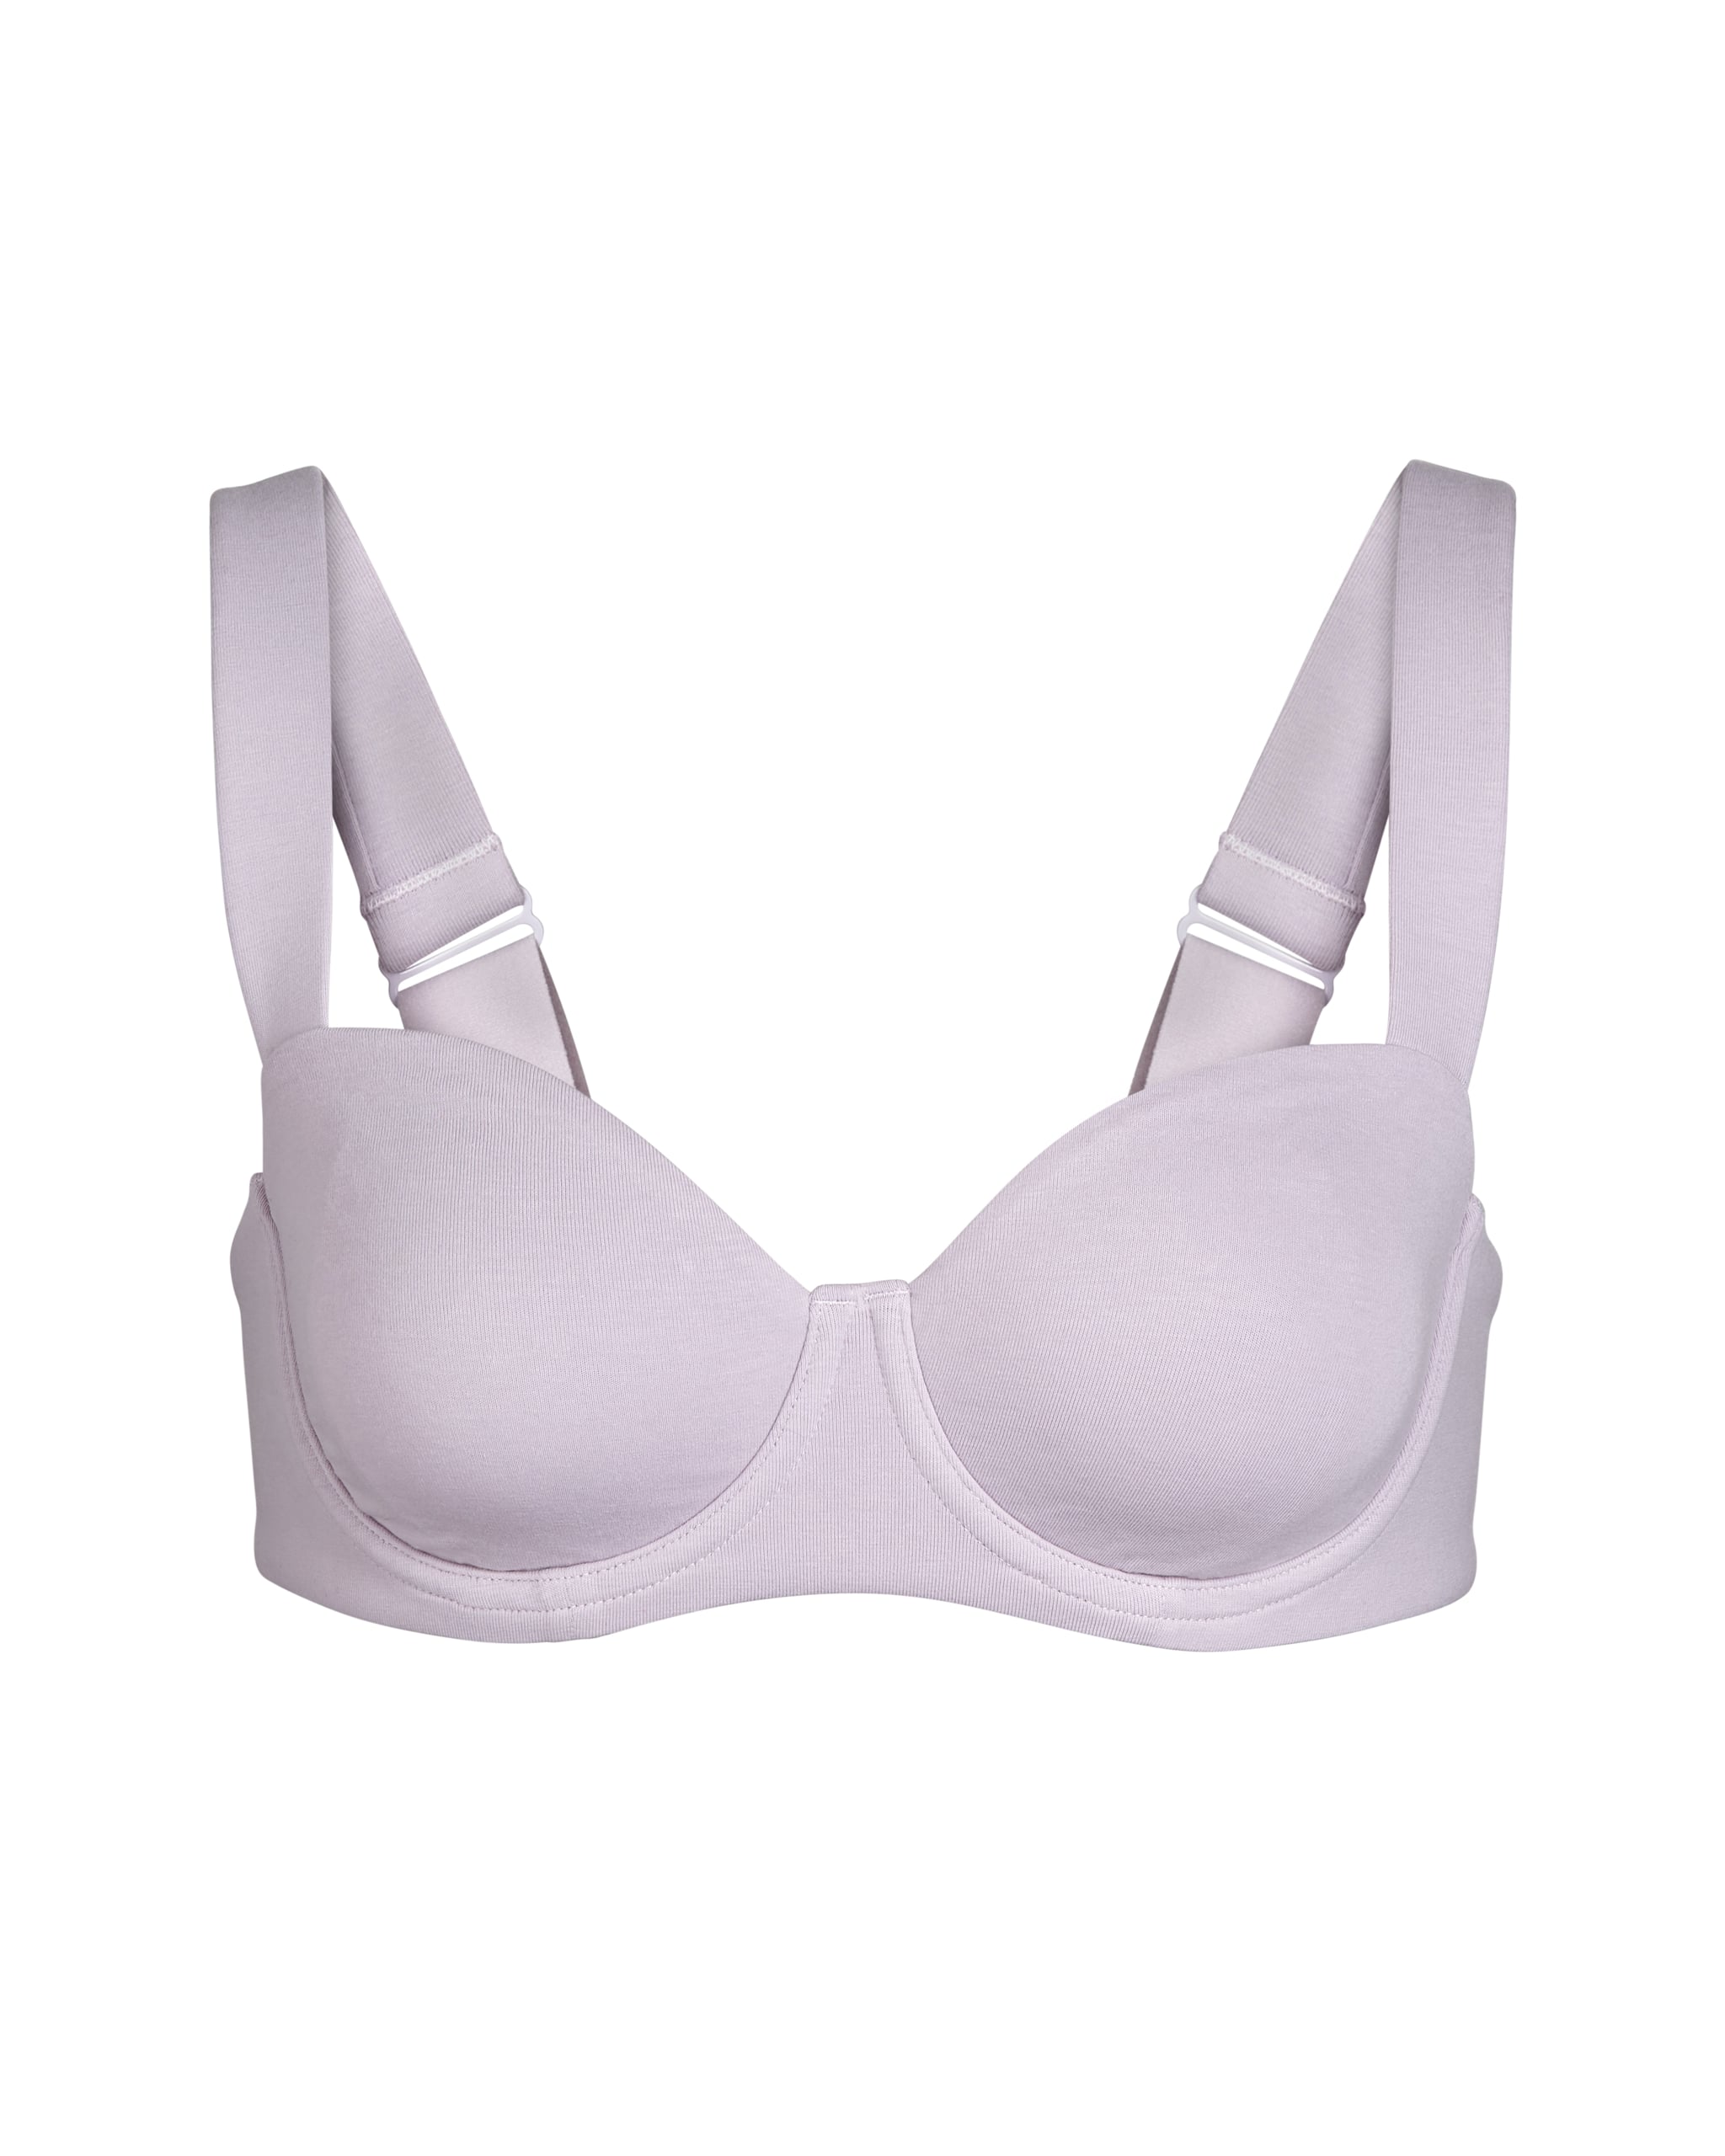 Skims Cotton Balconette Bra in Iris Mica, Kim Kardashian Launches Cotton  Skims Collection, and TBH, It Looks a Lot Like Her Everyday Clothes